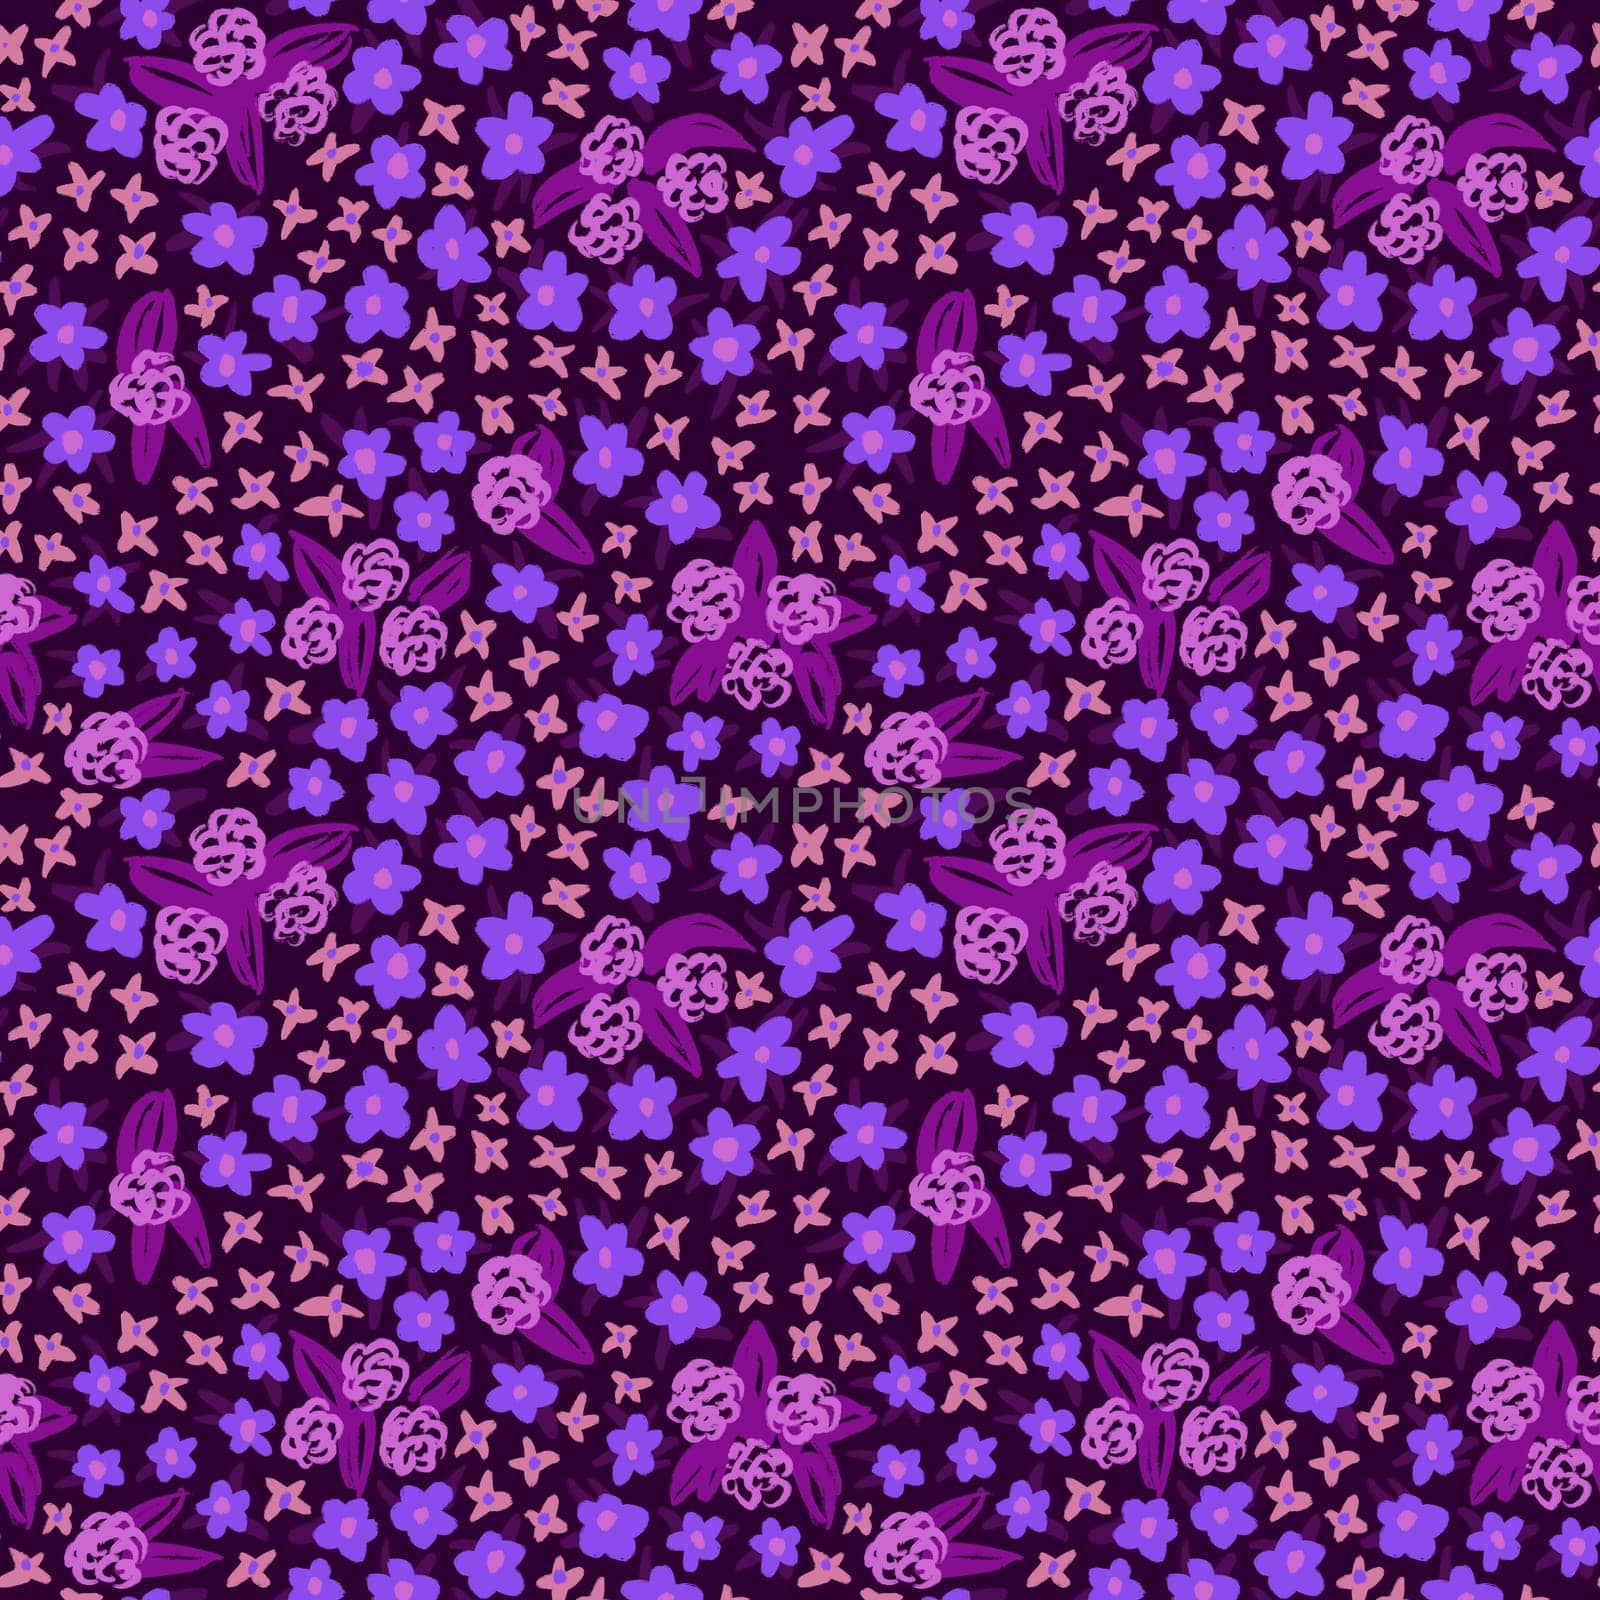 Hand drawn seamless pattern with blue dark purple flower floral elements, ditsy summer spring botanical nature print, bloom blossom stylized petals. Retro vintage fabric design, cute dots nature meadow